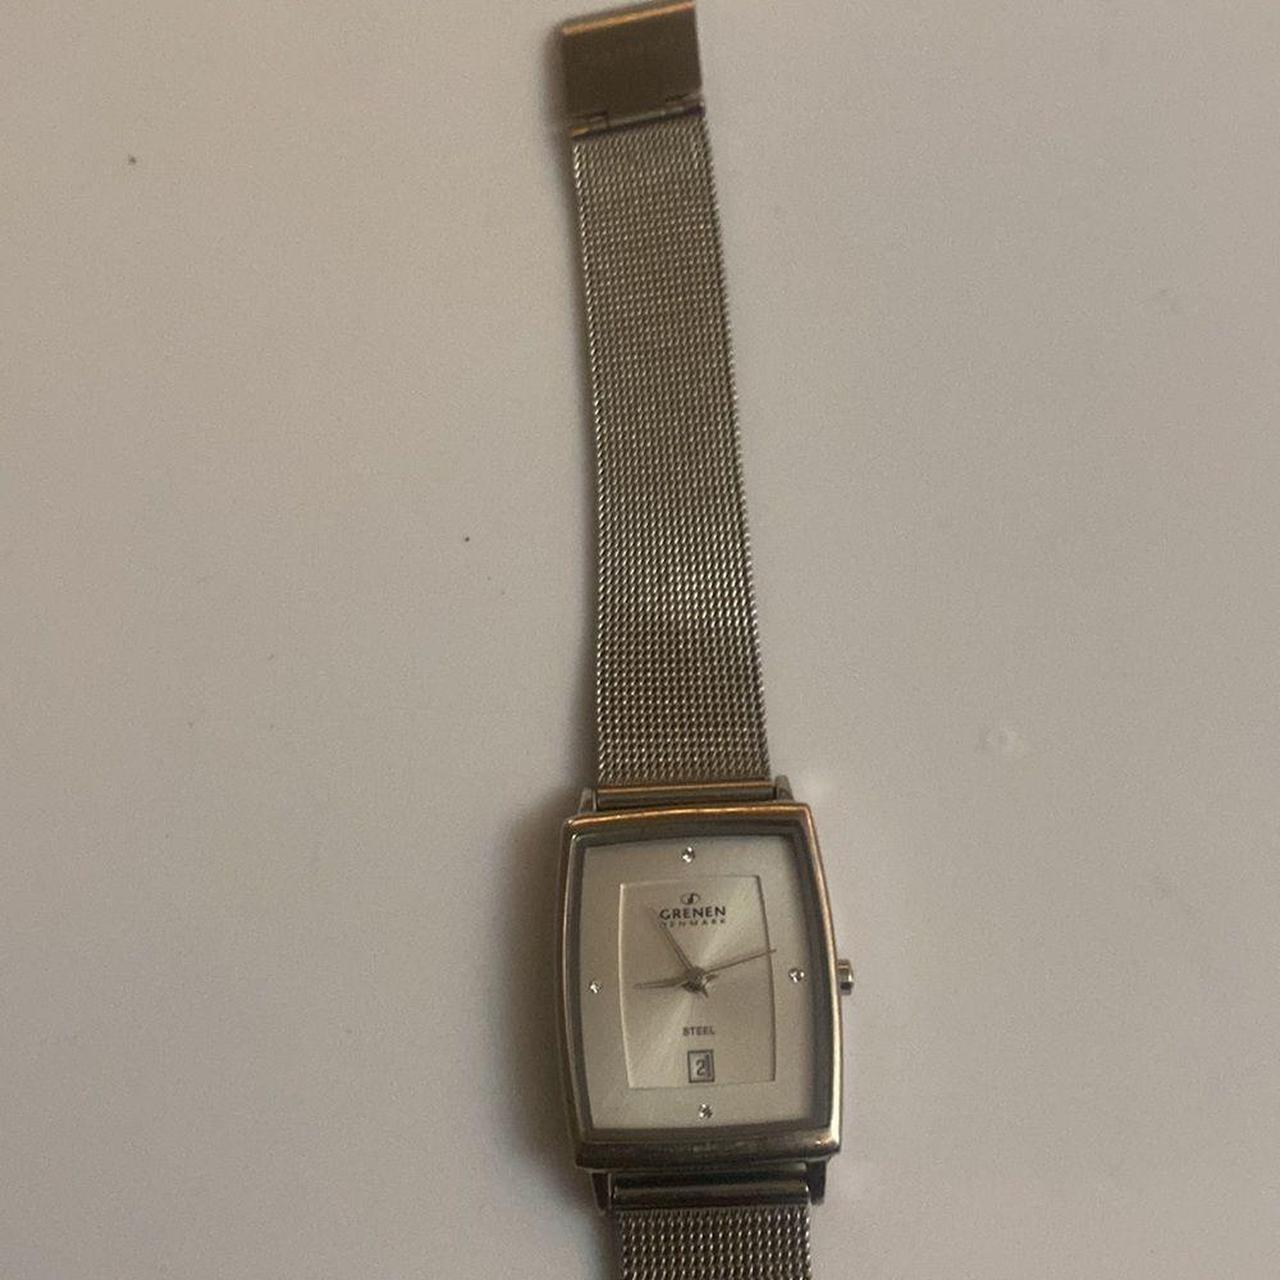 Product Image 2 - Watch is in excellent condition.